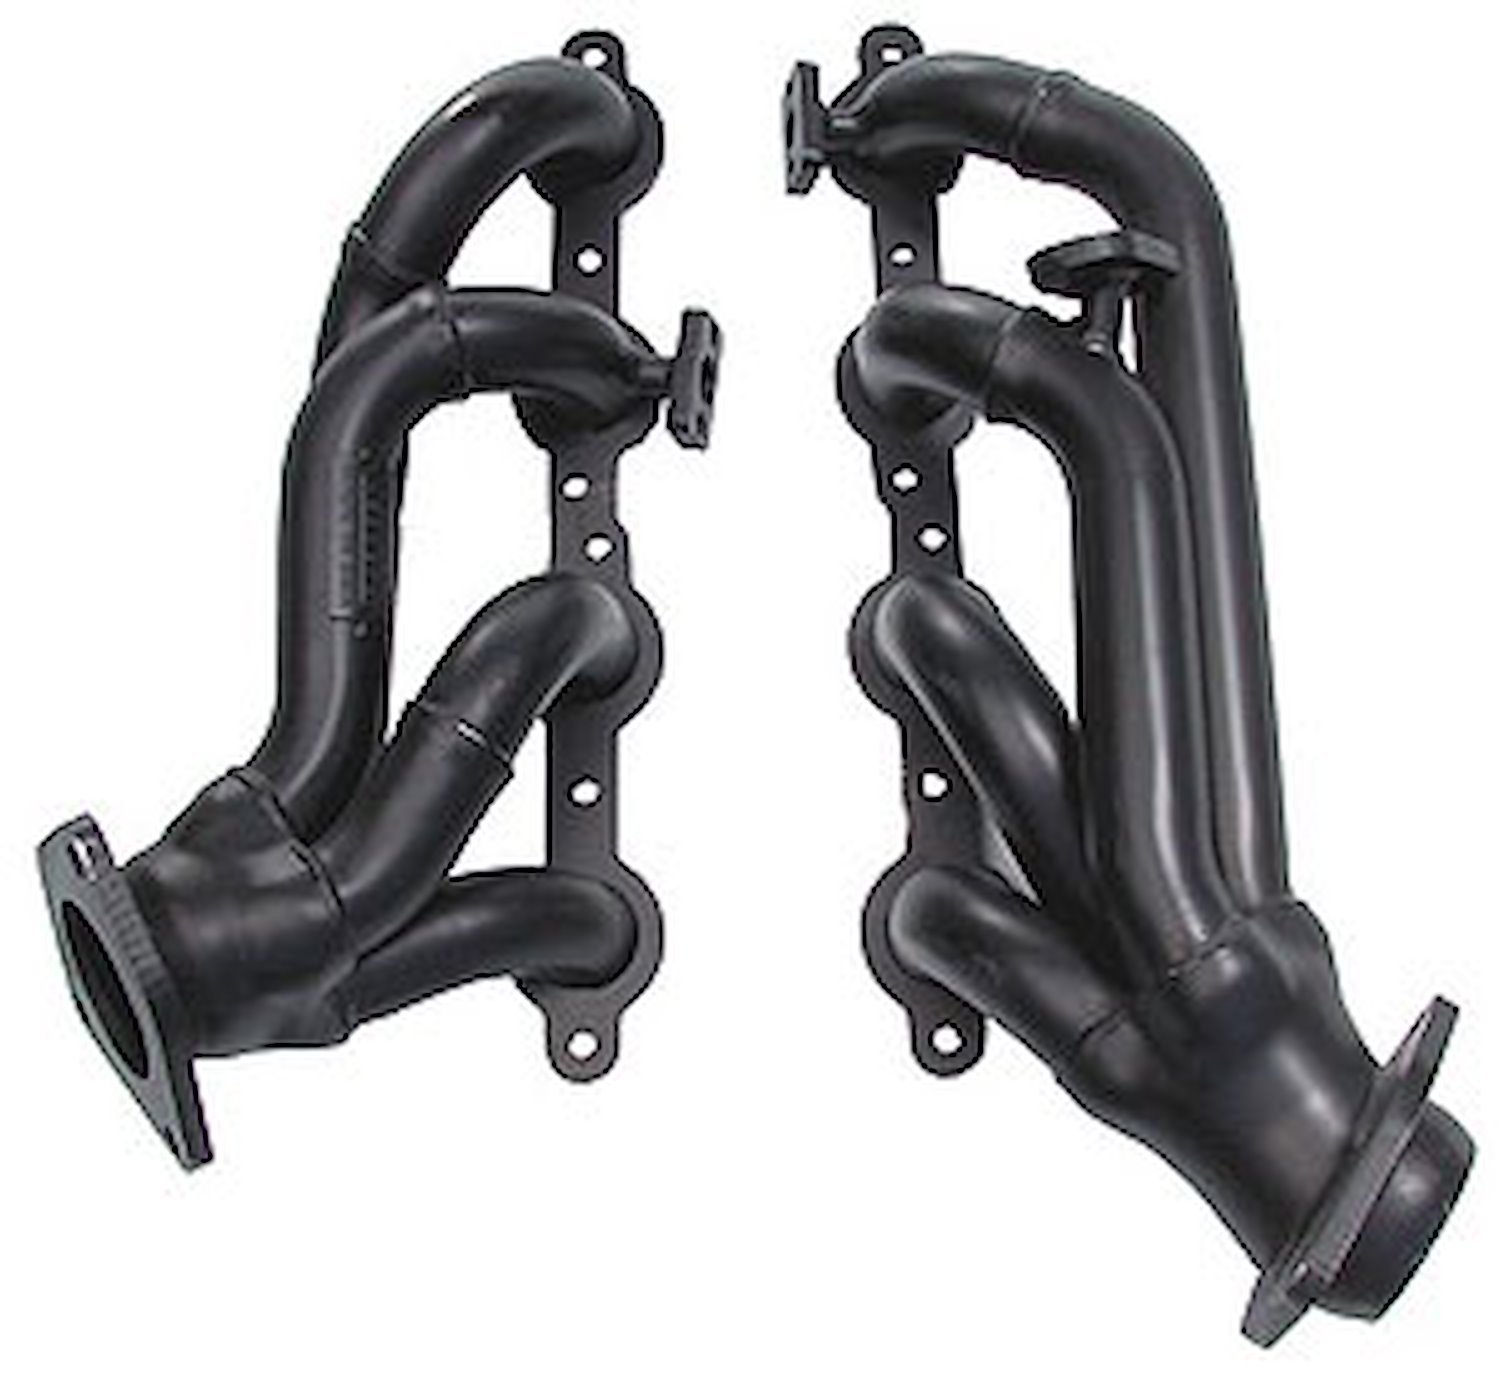 Standard Duty Uncoated Shorty Headers for 1999-2003 Chevy/GMC/Cadillac Truck/SUV